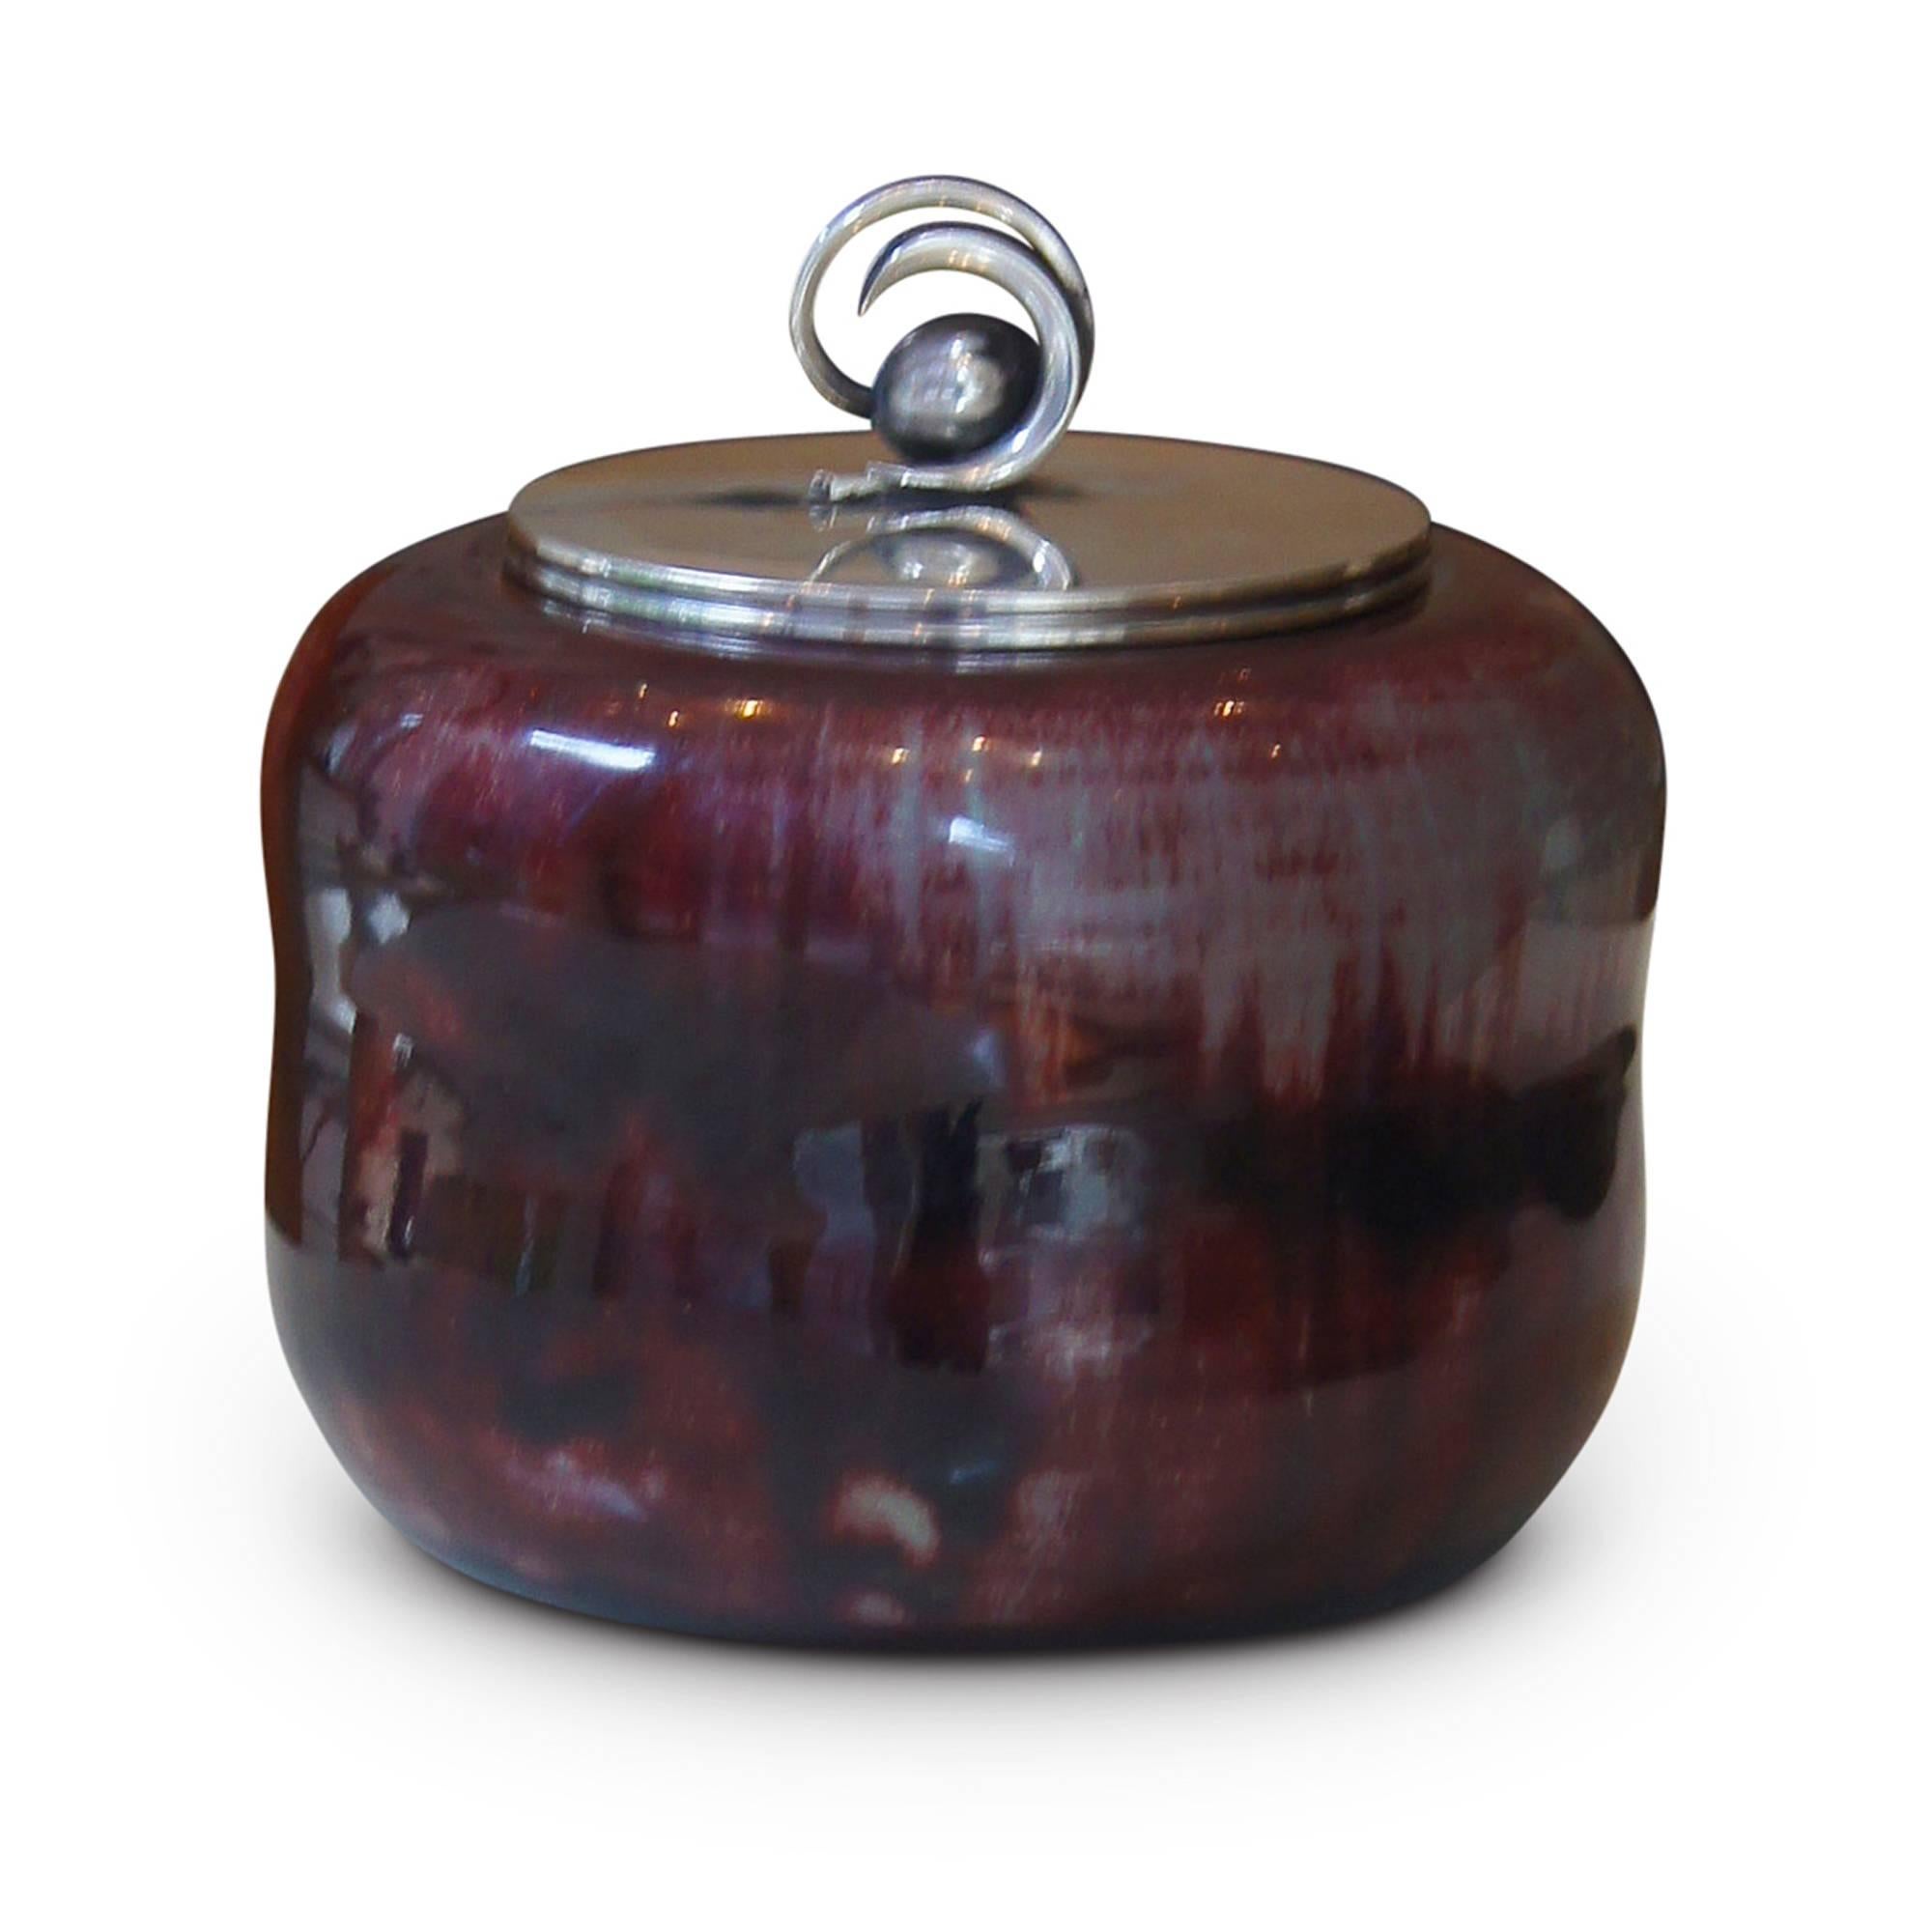 Exceptional and unique Art Deco lidded stoneware jar with and elegantly undulating Silhouette by Carl Halier (1873-1948) for Royal Copenhagen, in stoneware with an uncommon and strikingly vibrant and painterly oxblood/celadon glaze combination, with